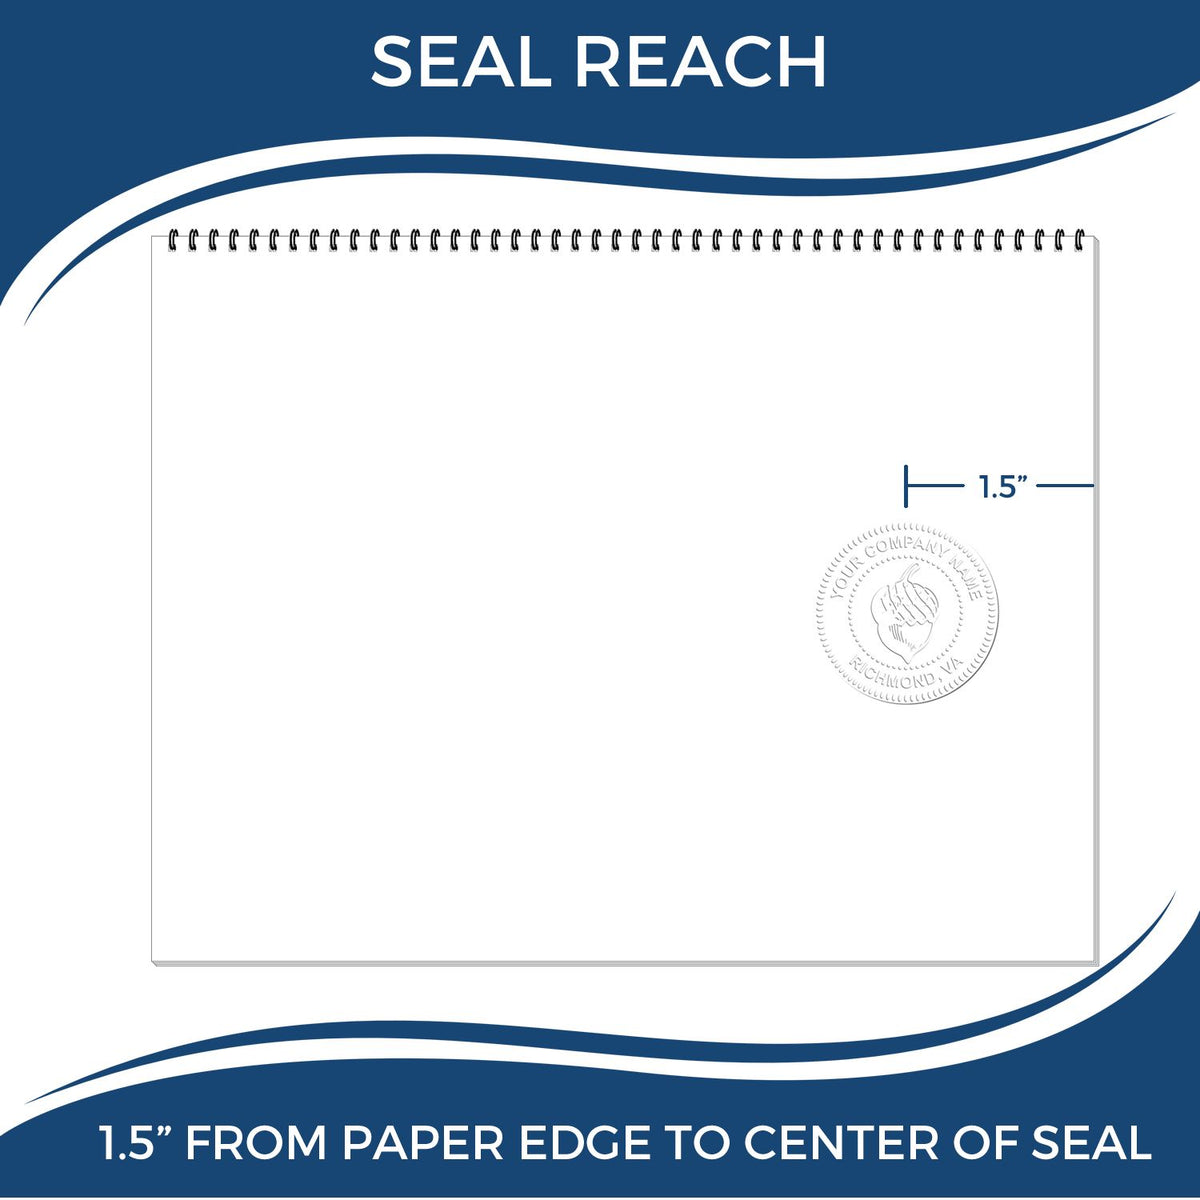 An infographic showing the seal reach which is represented by a ruler and a miniature seal image of the Gift Mississippi Engineer Seal